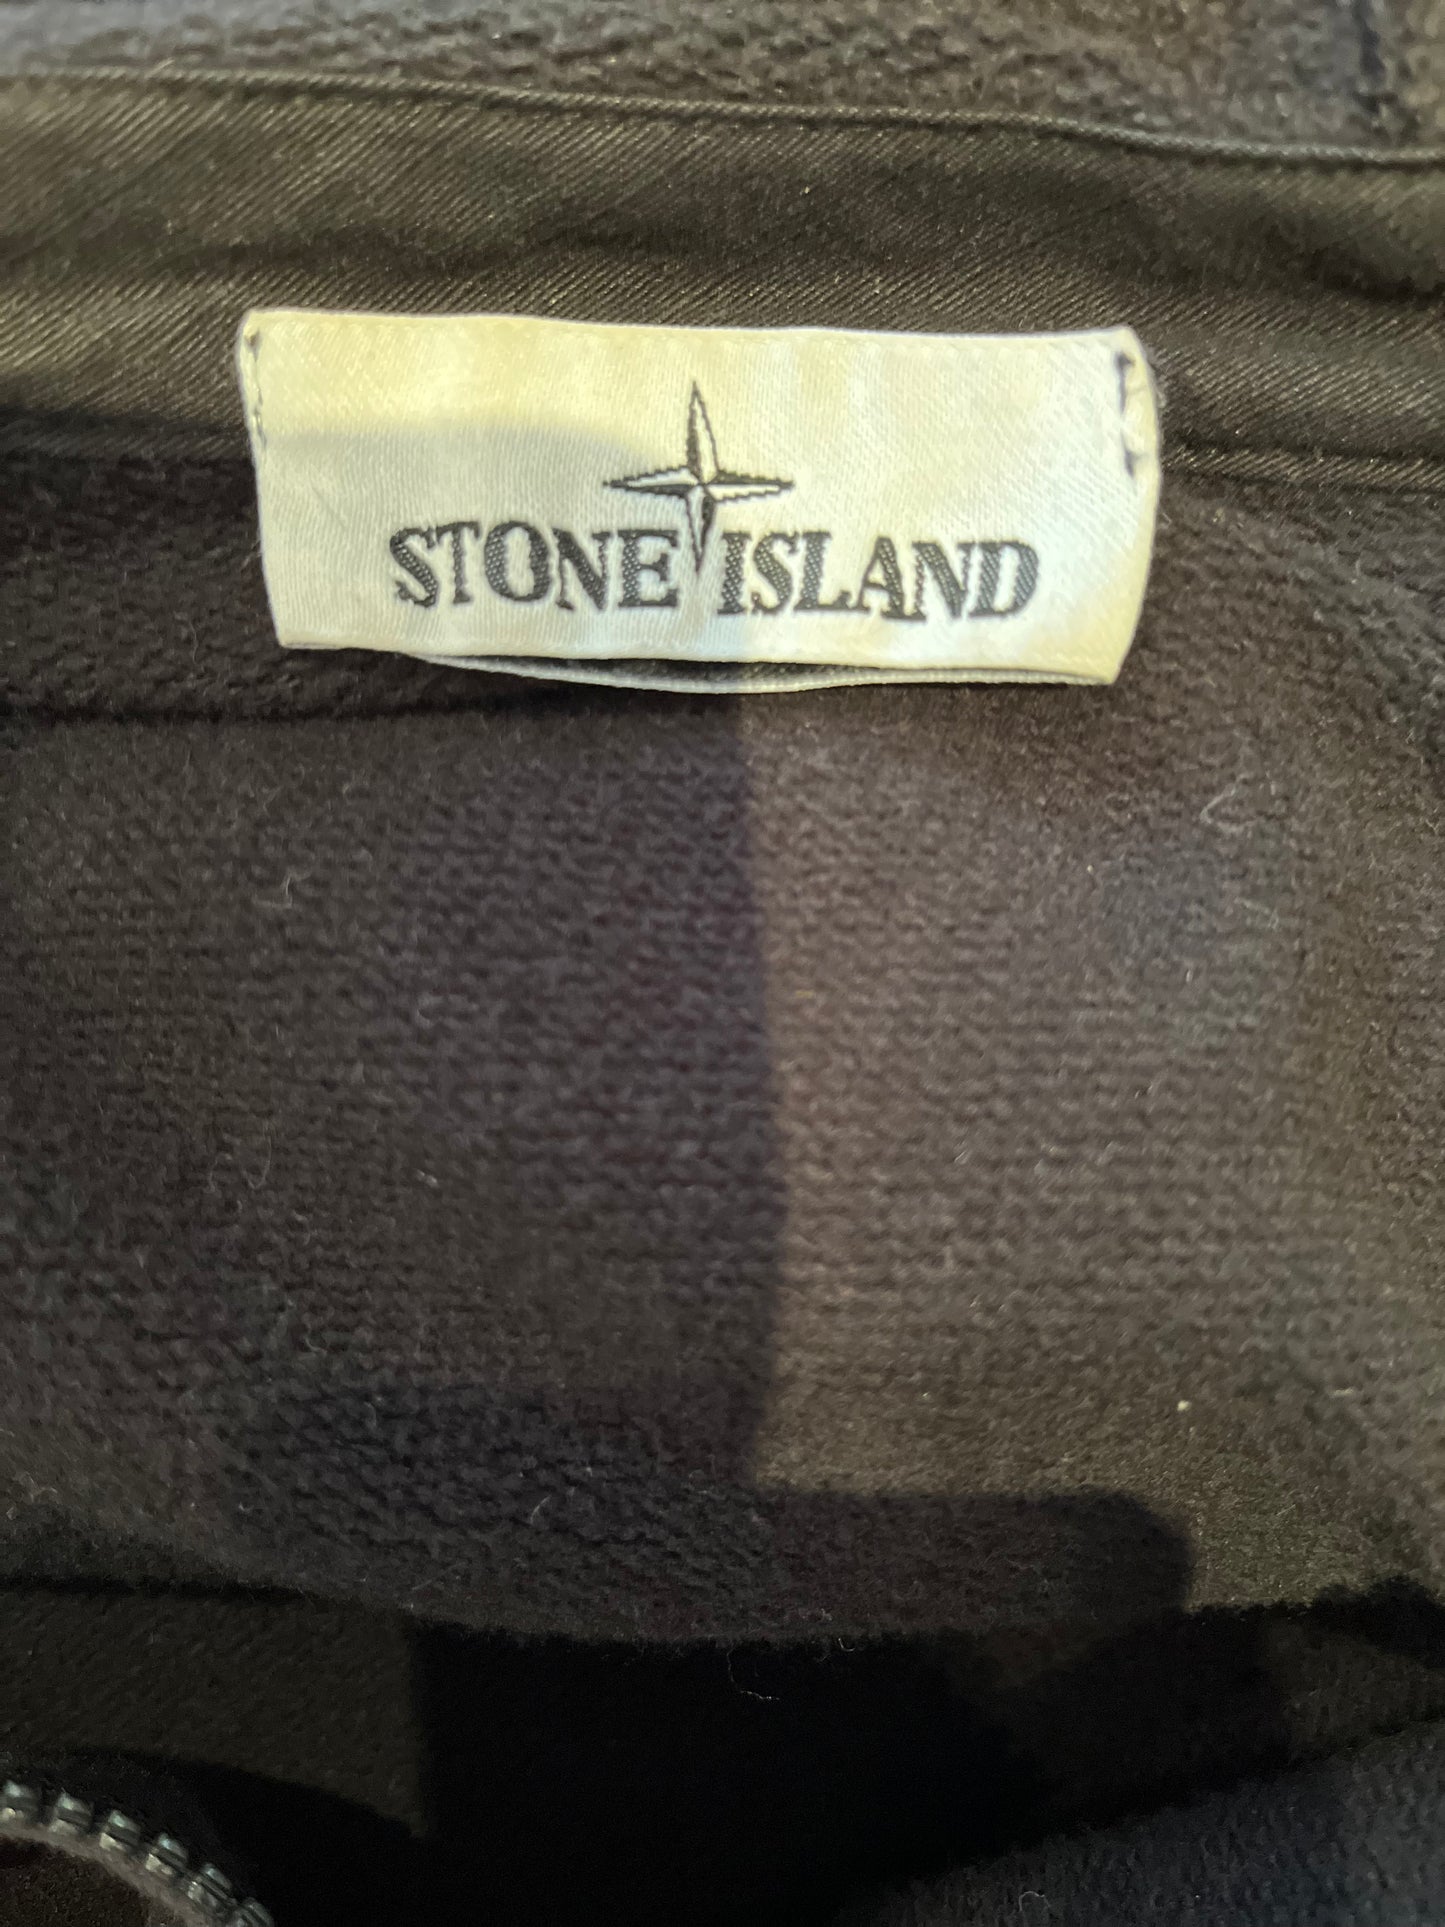 Stone Island 100% Cotton Yellow Fleece Hoodie Size XL with Logo Badge In primo condition